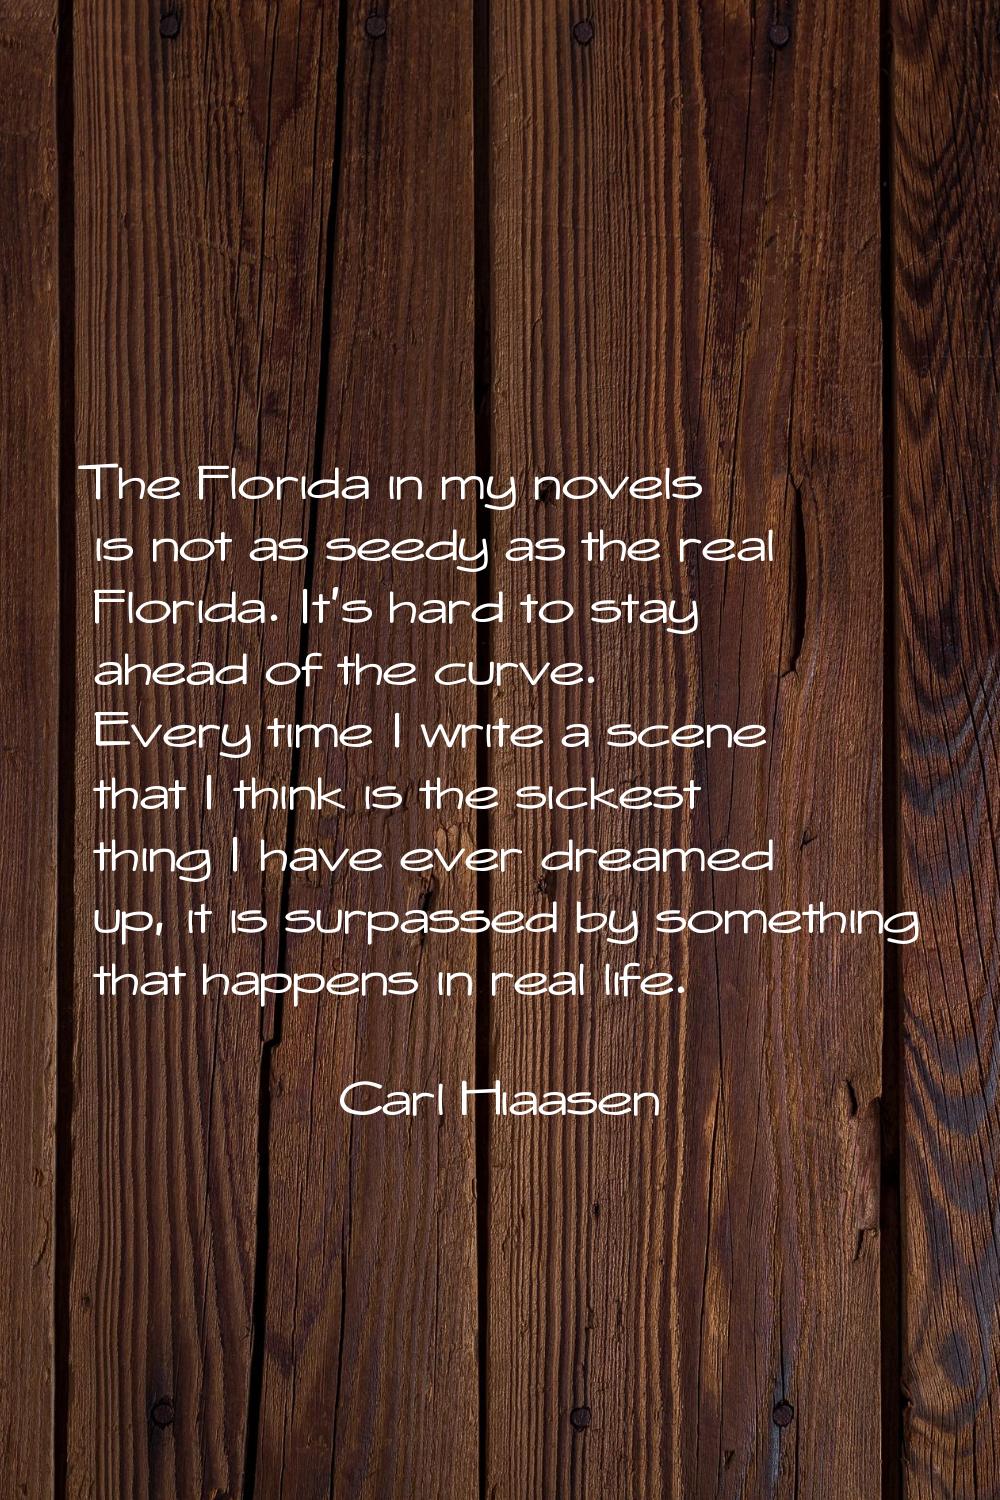 The Florida in my novels is not as seedy as the real Florida. It's hard to stay ahead of the curve.